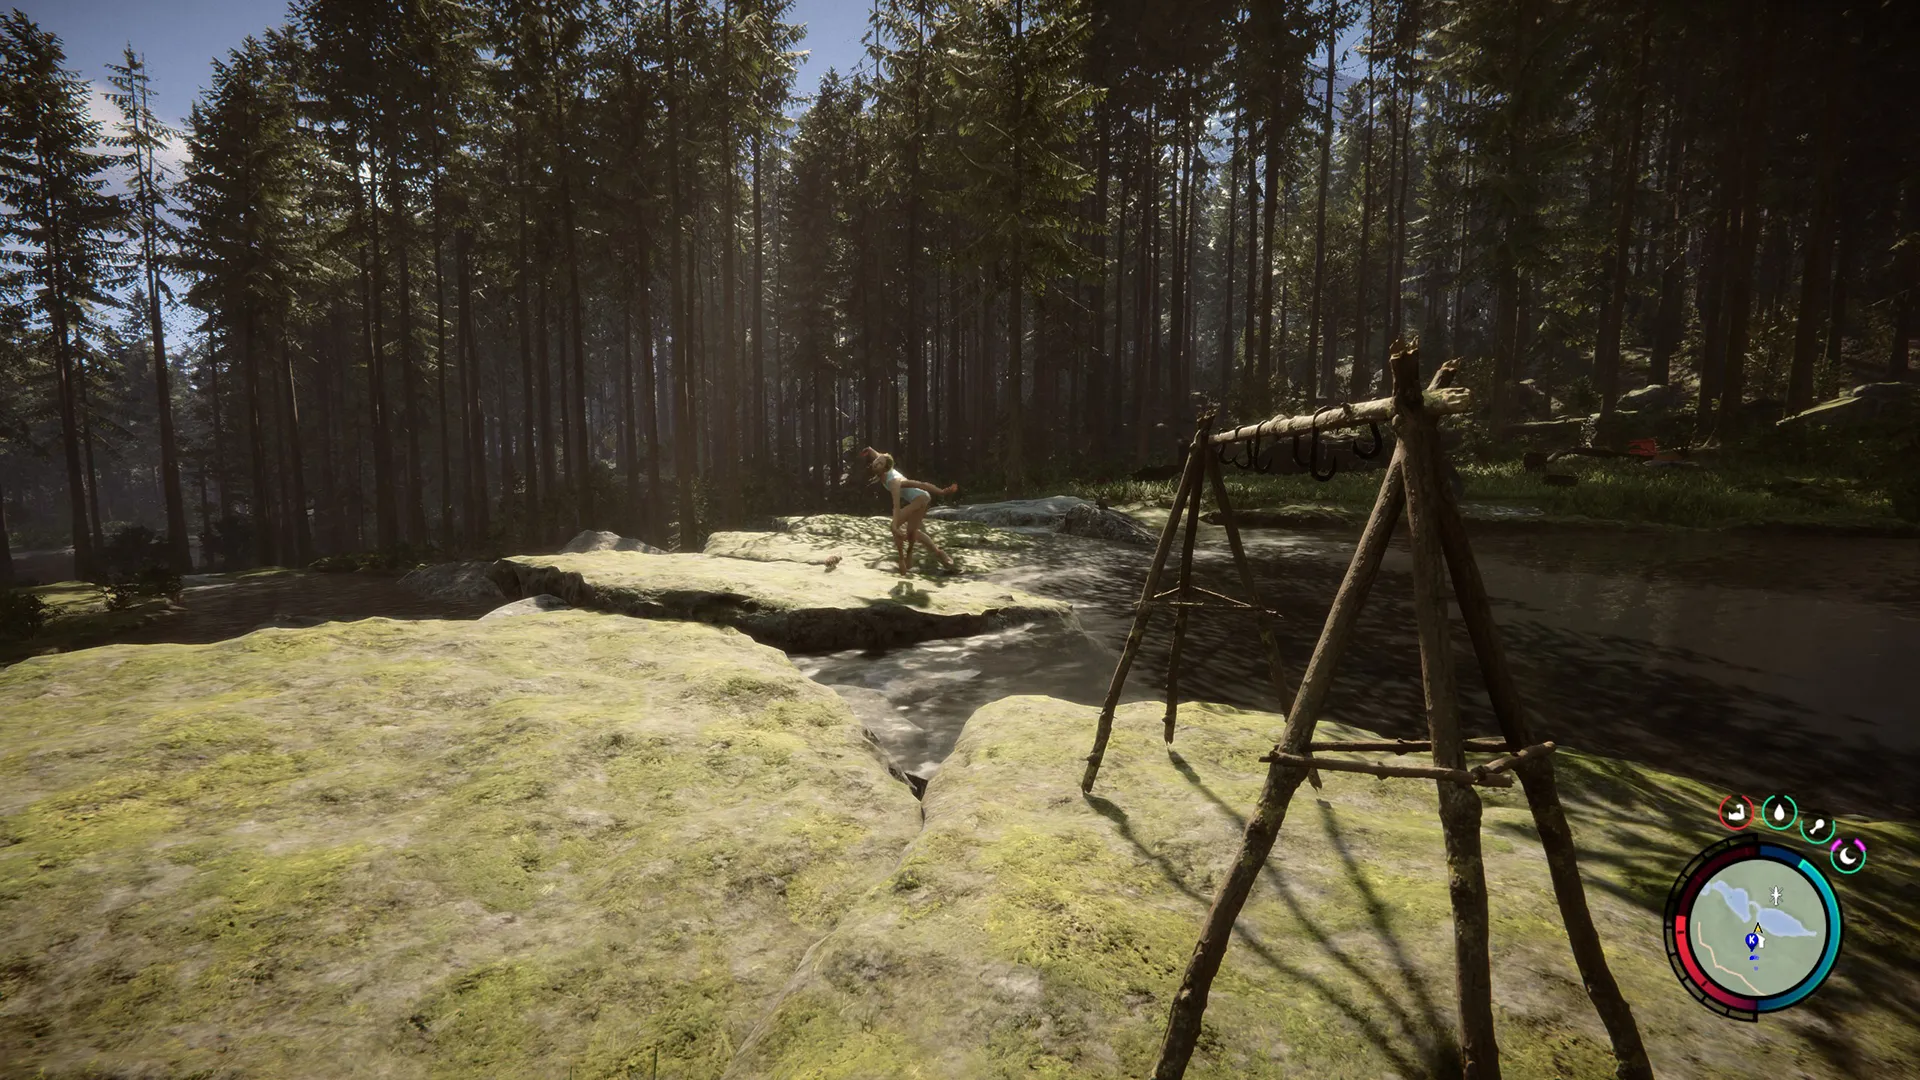 Sons of the Forest: Early Access Review - Magnetic Magazine